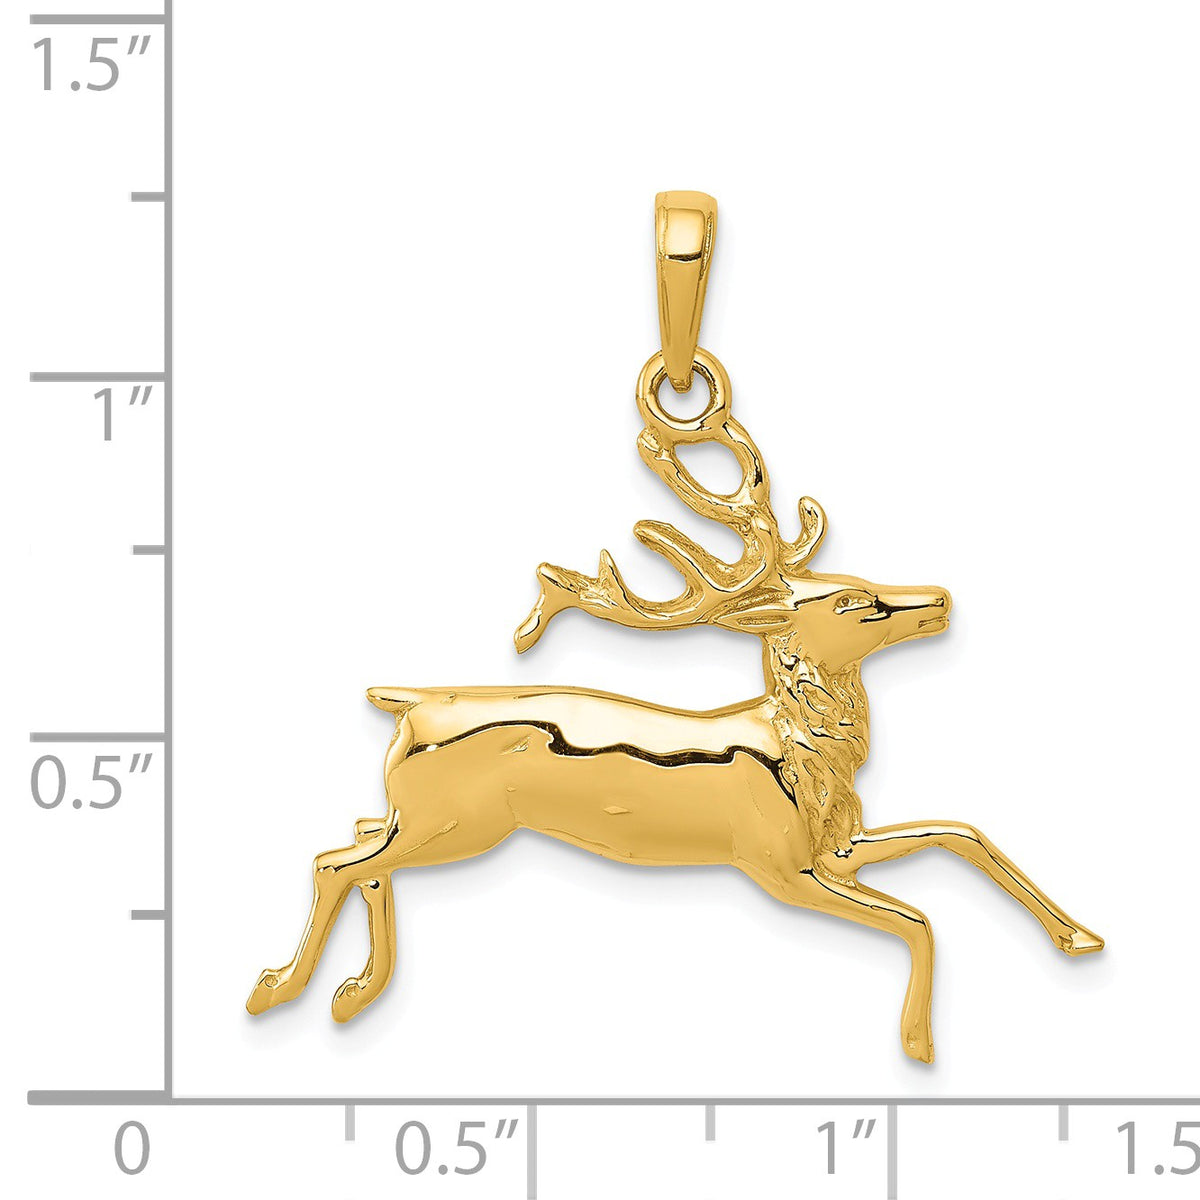 Alternate view of the 14k Yellow Gold Running Deer Buck Pendant by The Black Bow Jewelry Co.